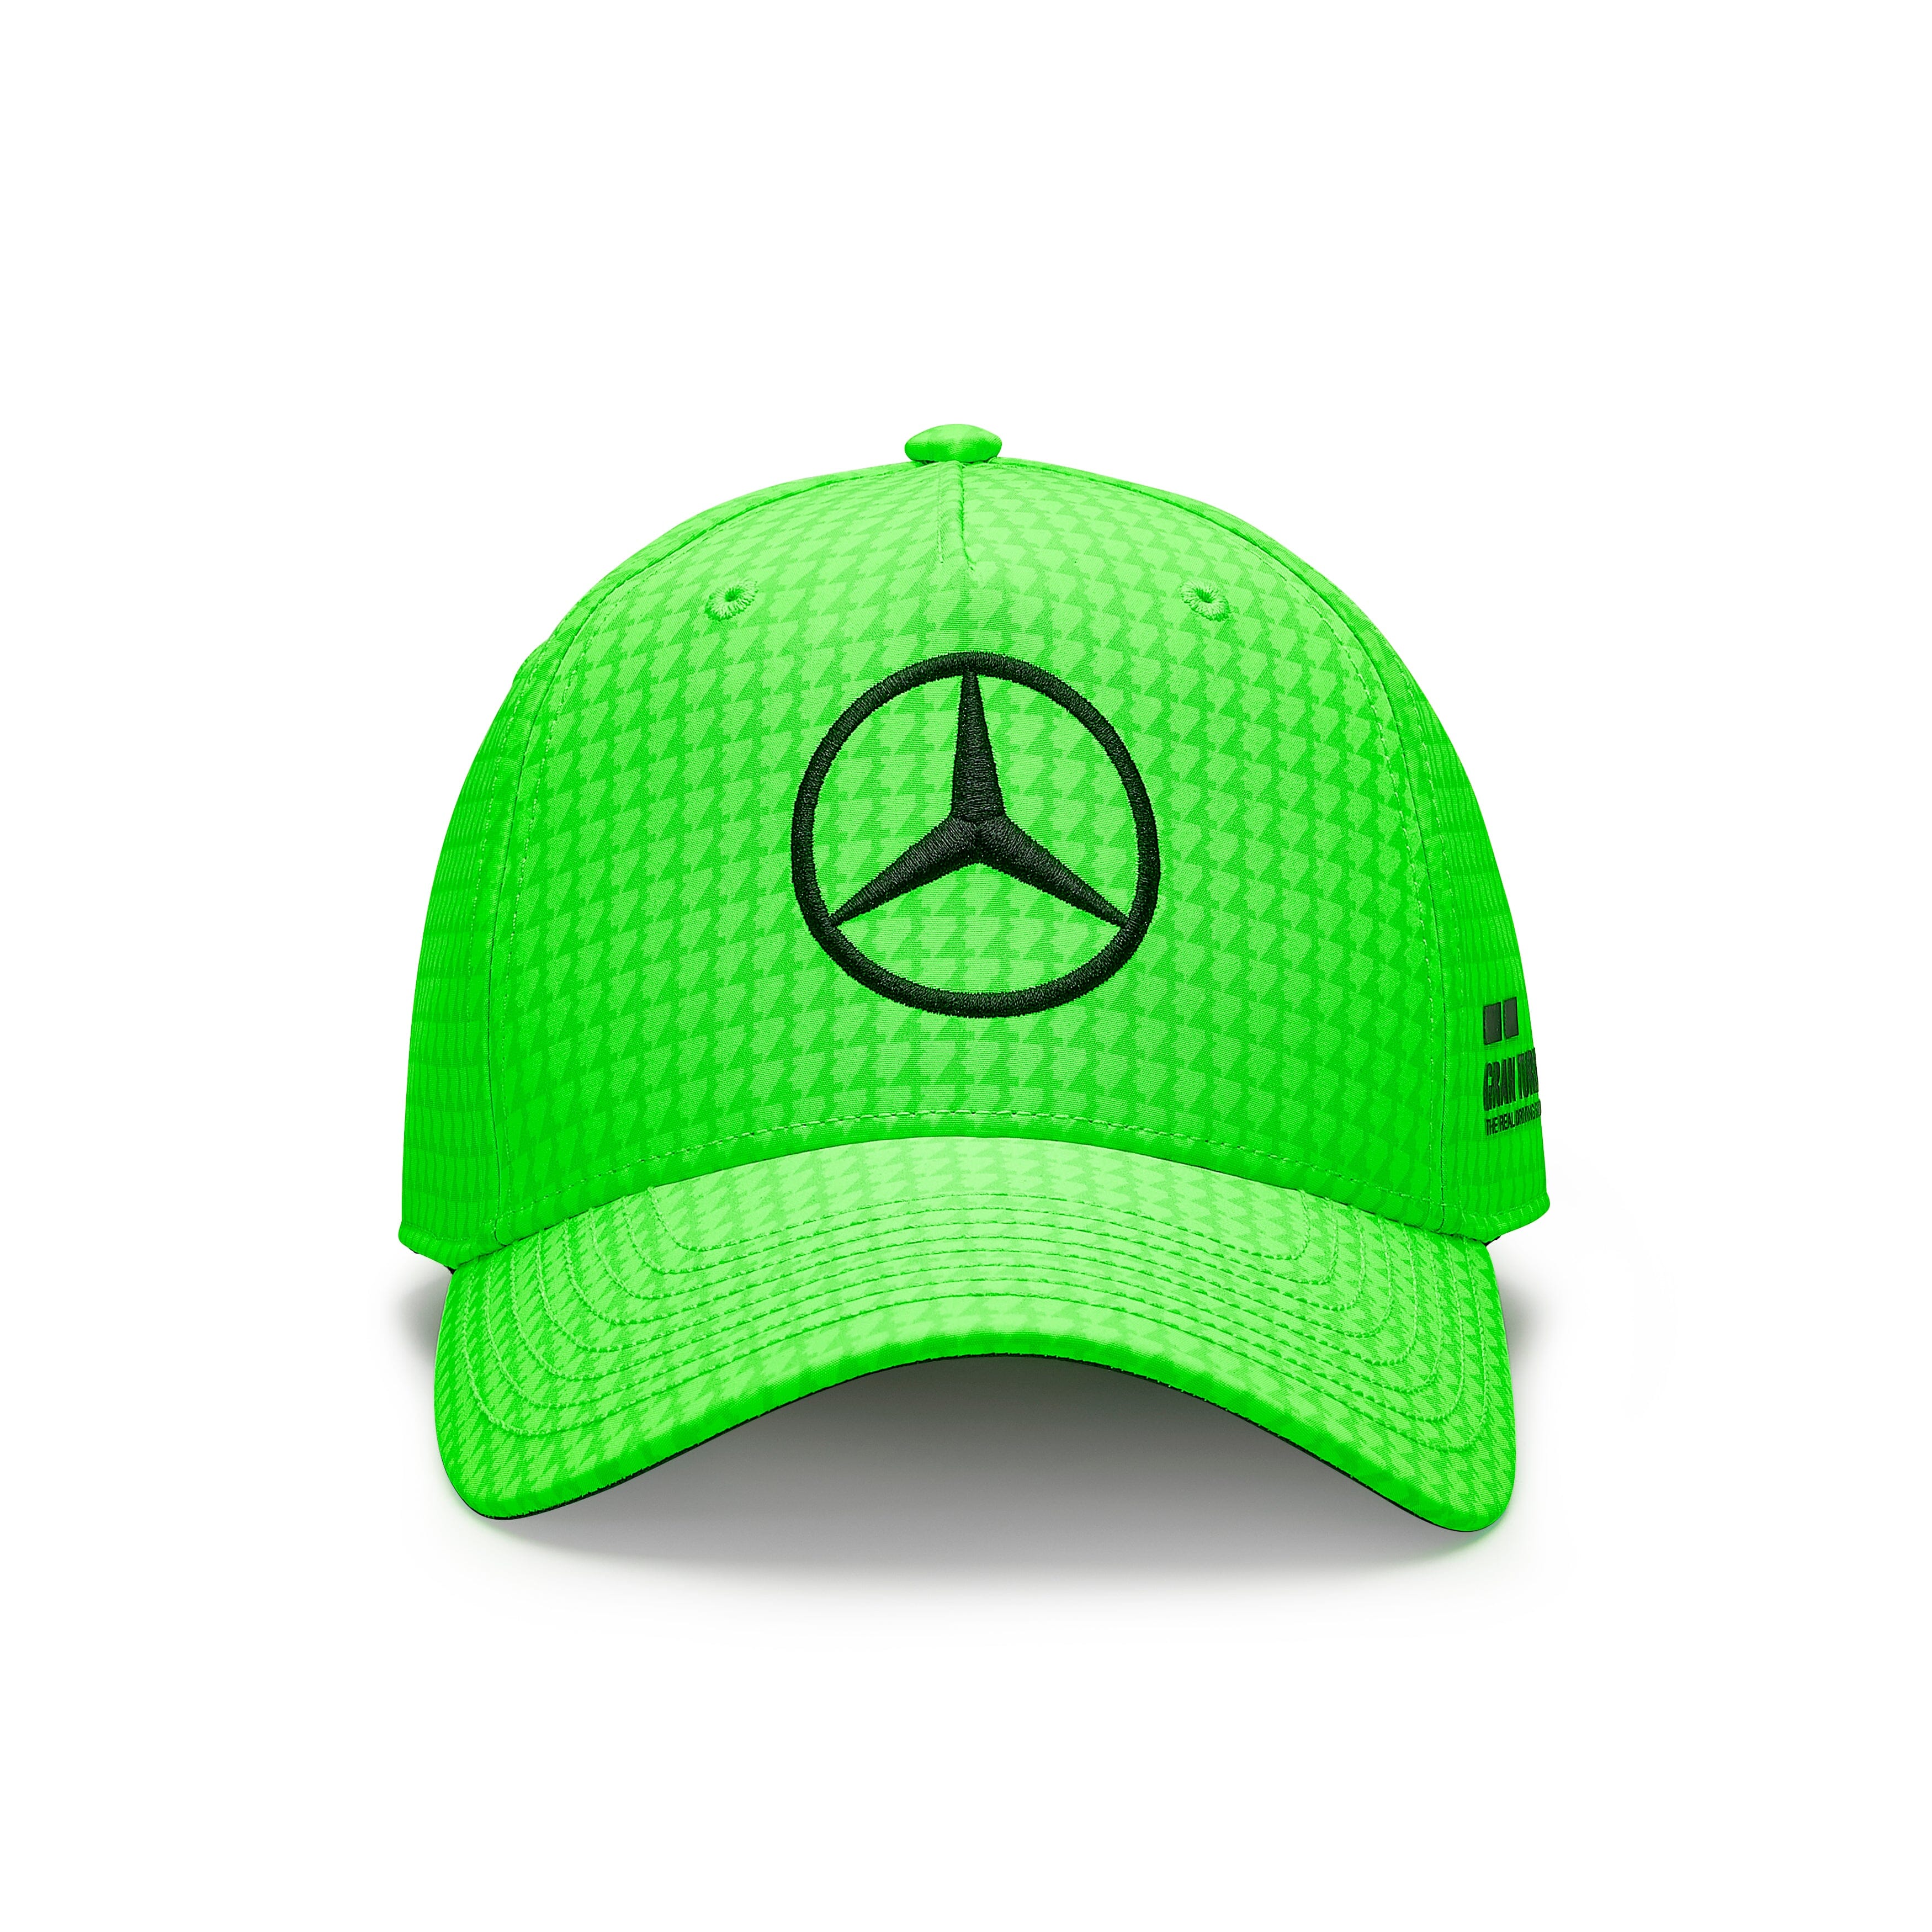 Mercedes AMG F1 Special Edition Kids Lewis Hamilton Silverstone GP Hat- Youth Green